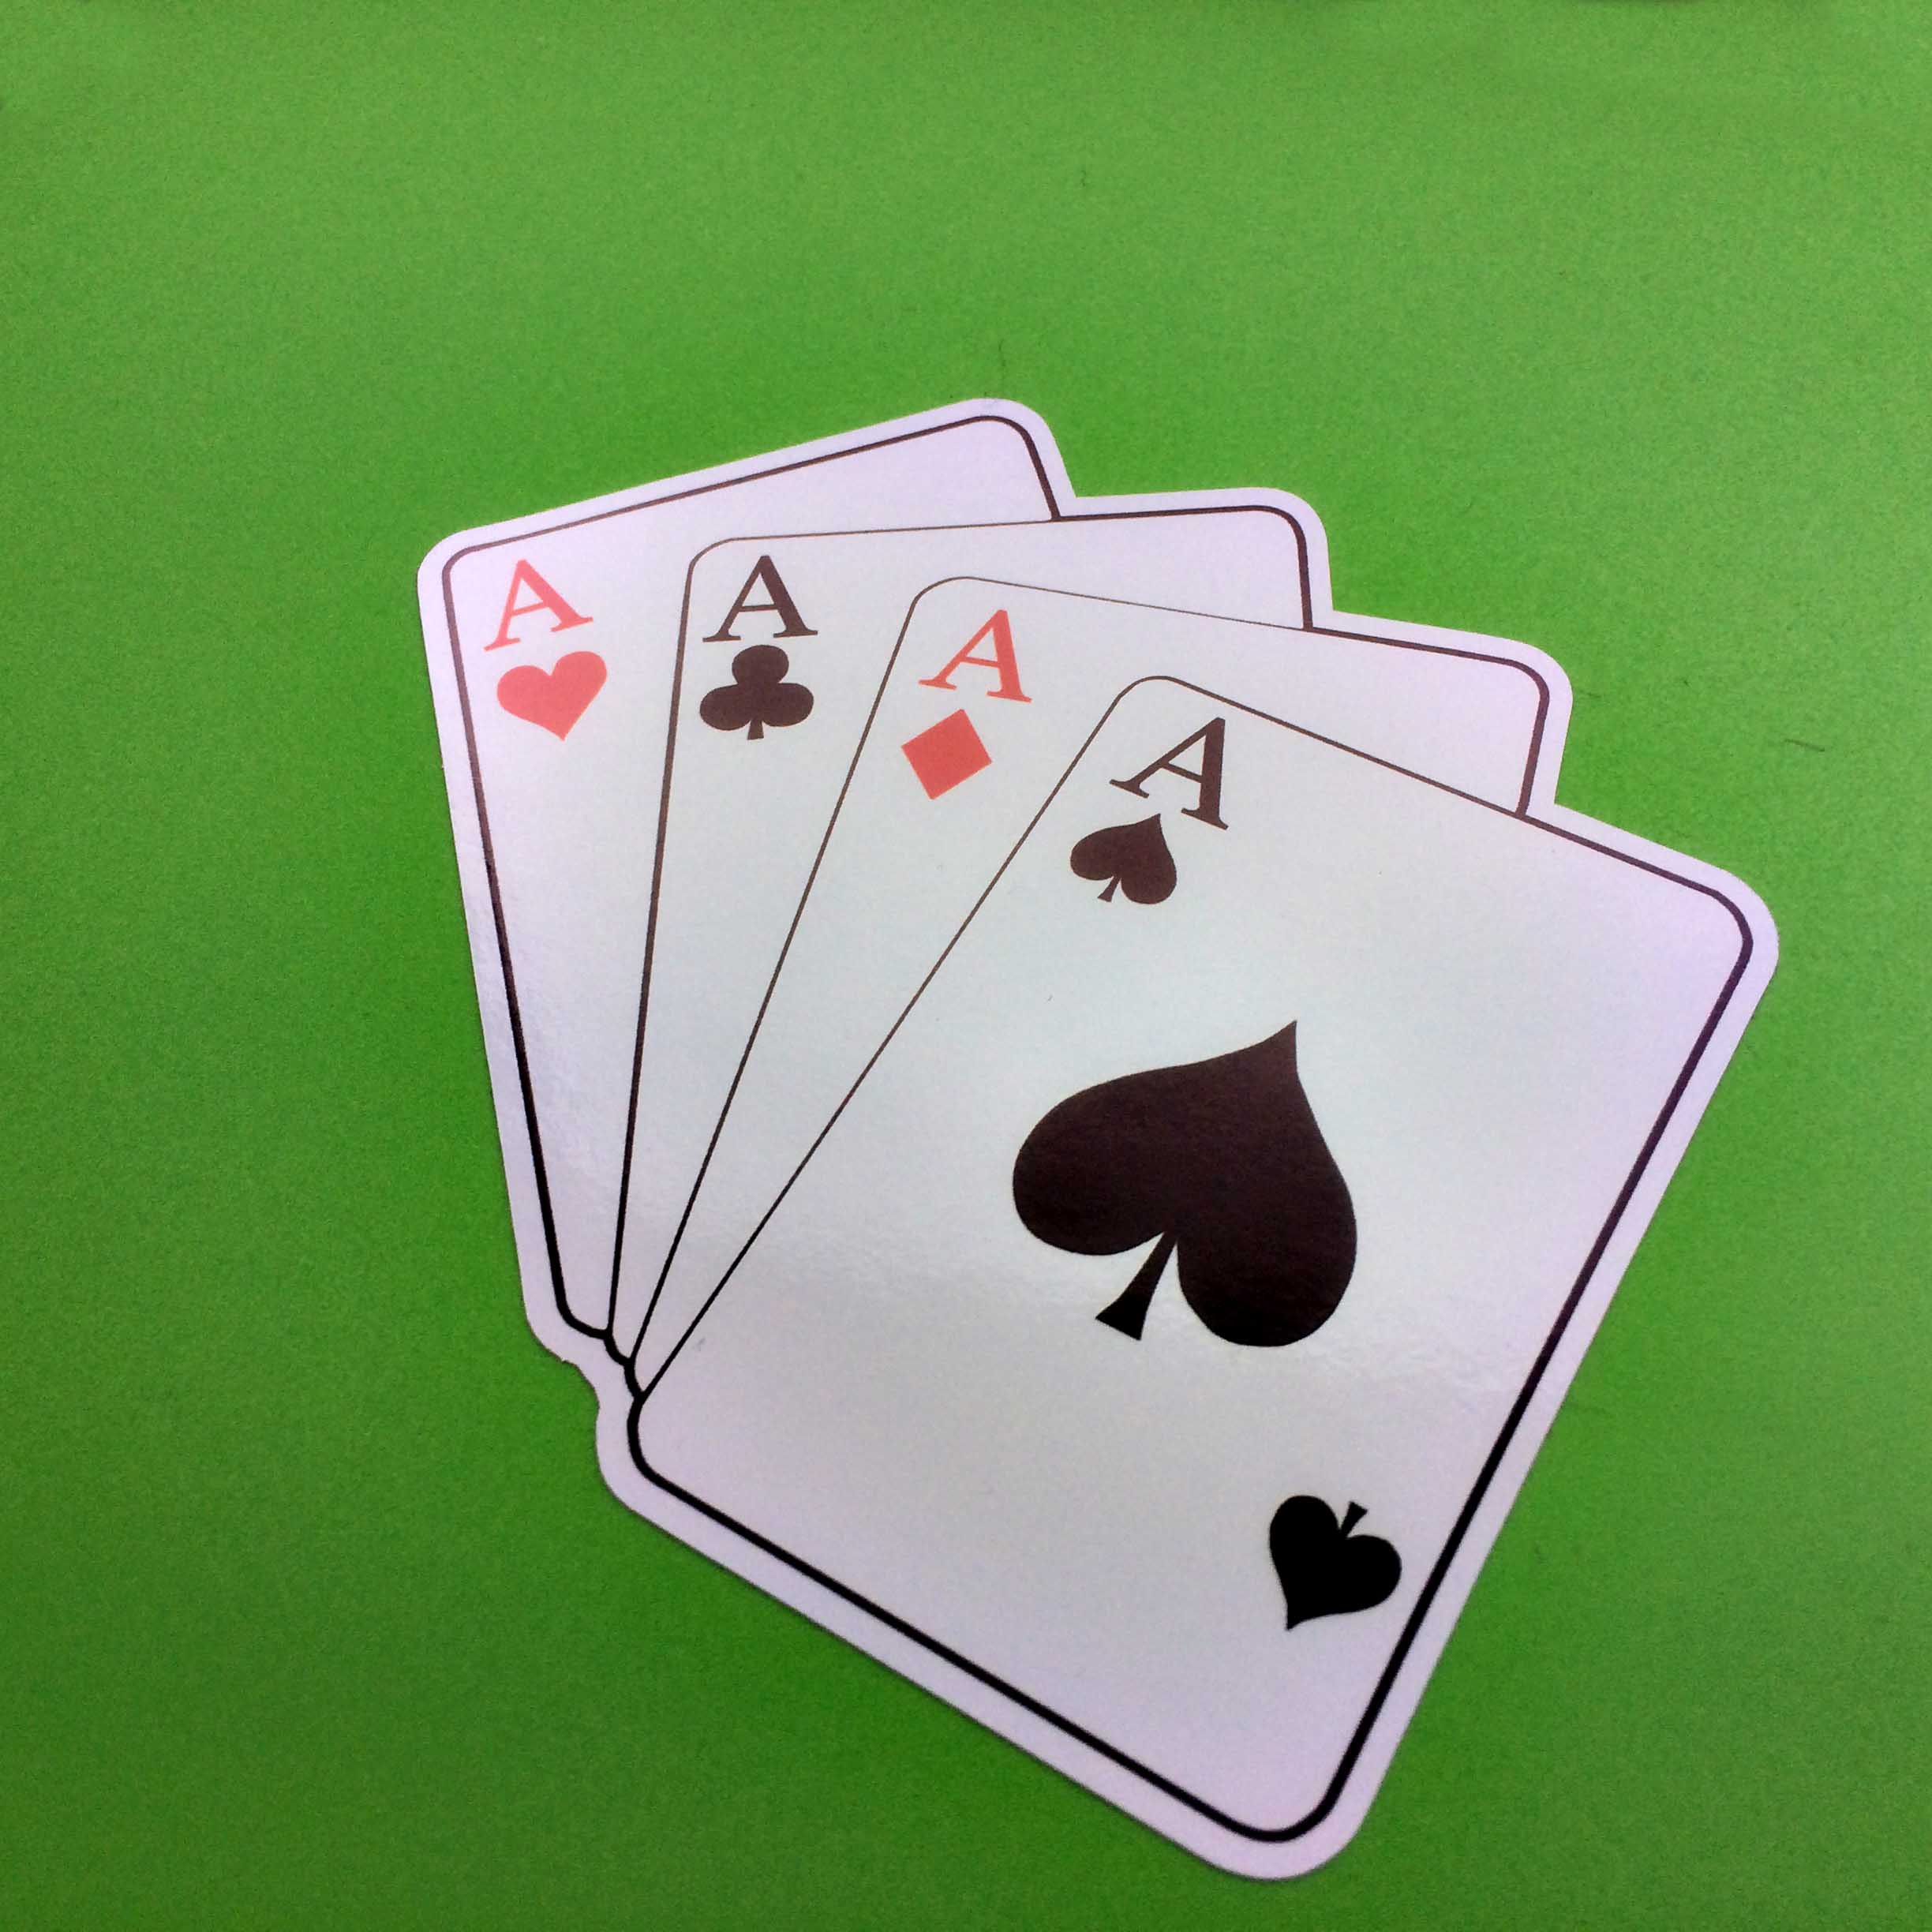 A fan of four aces playing cards. The black ace of spades and clubs; the red ace of hearts and diamonds.